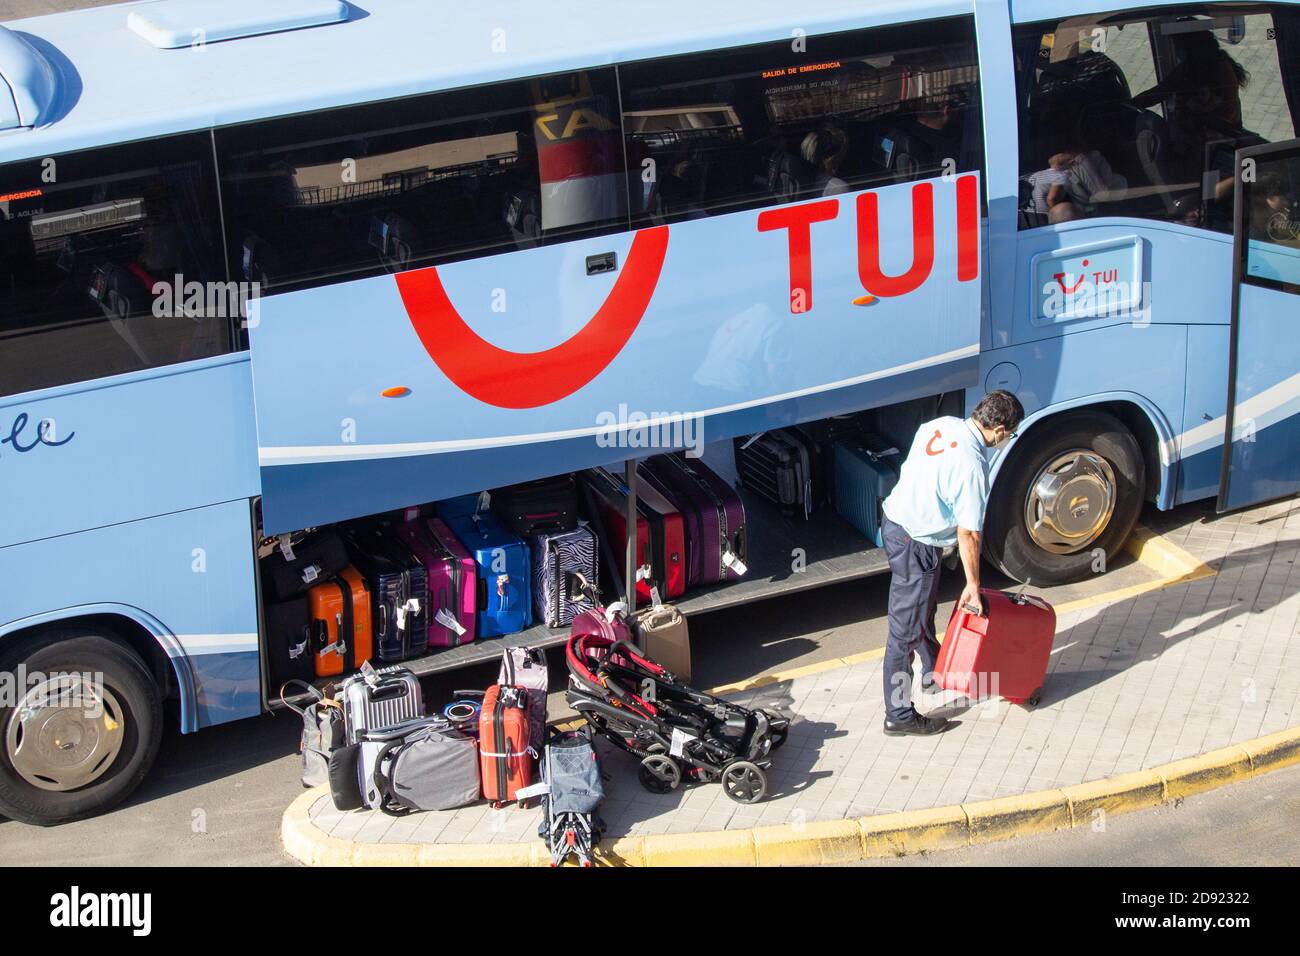 tui-clients-tourists-boarding-coaches-at-gran-canaria-airport-canary